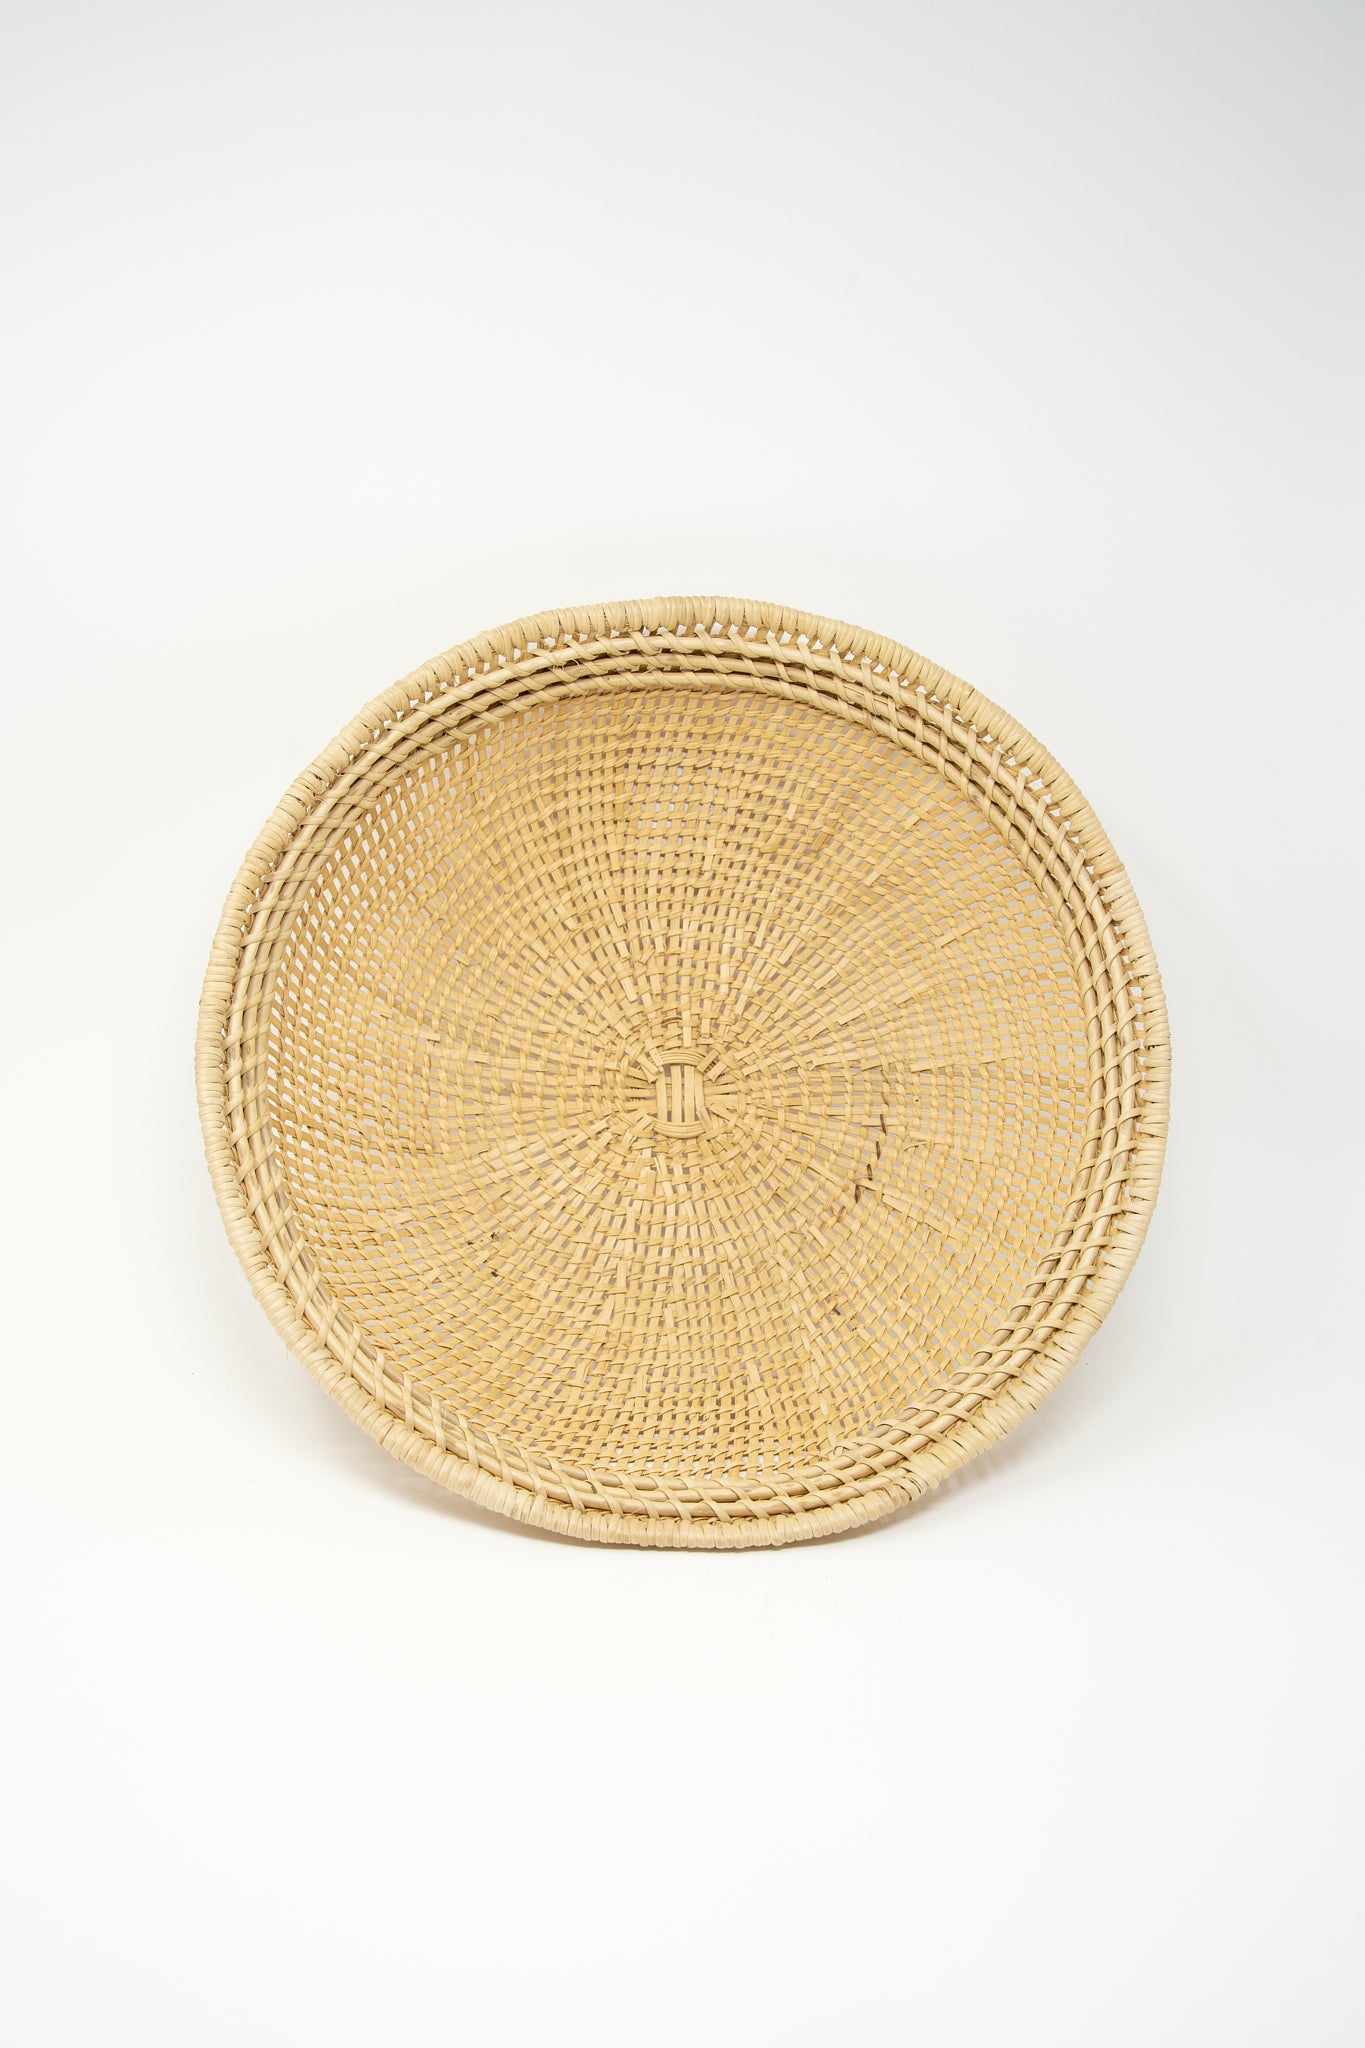 An artisan-crafted Plaza Bolivar rattan basket, showcasing intricate weaving techniques, set on a pristine white background.